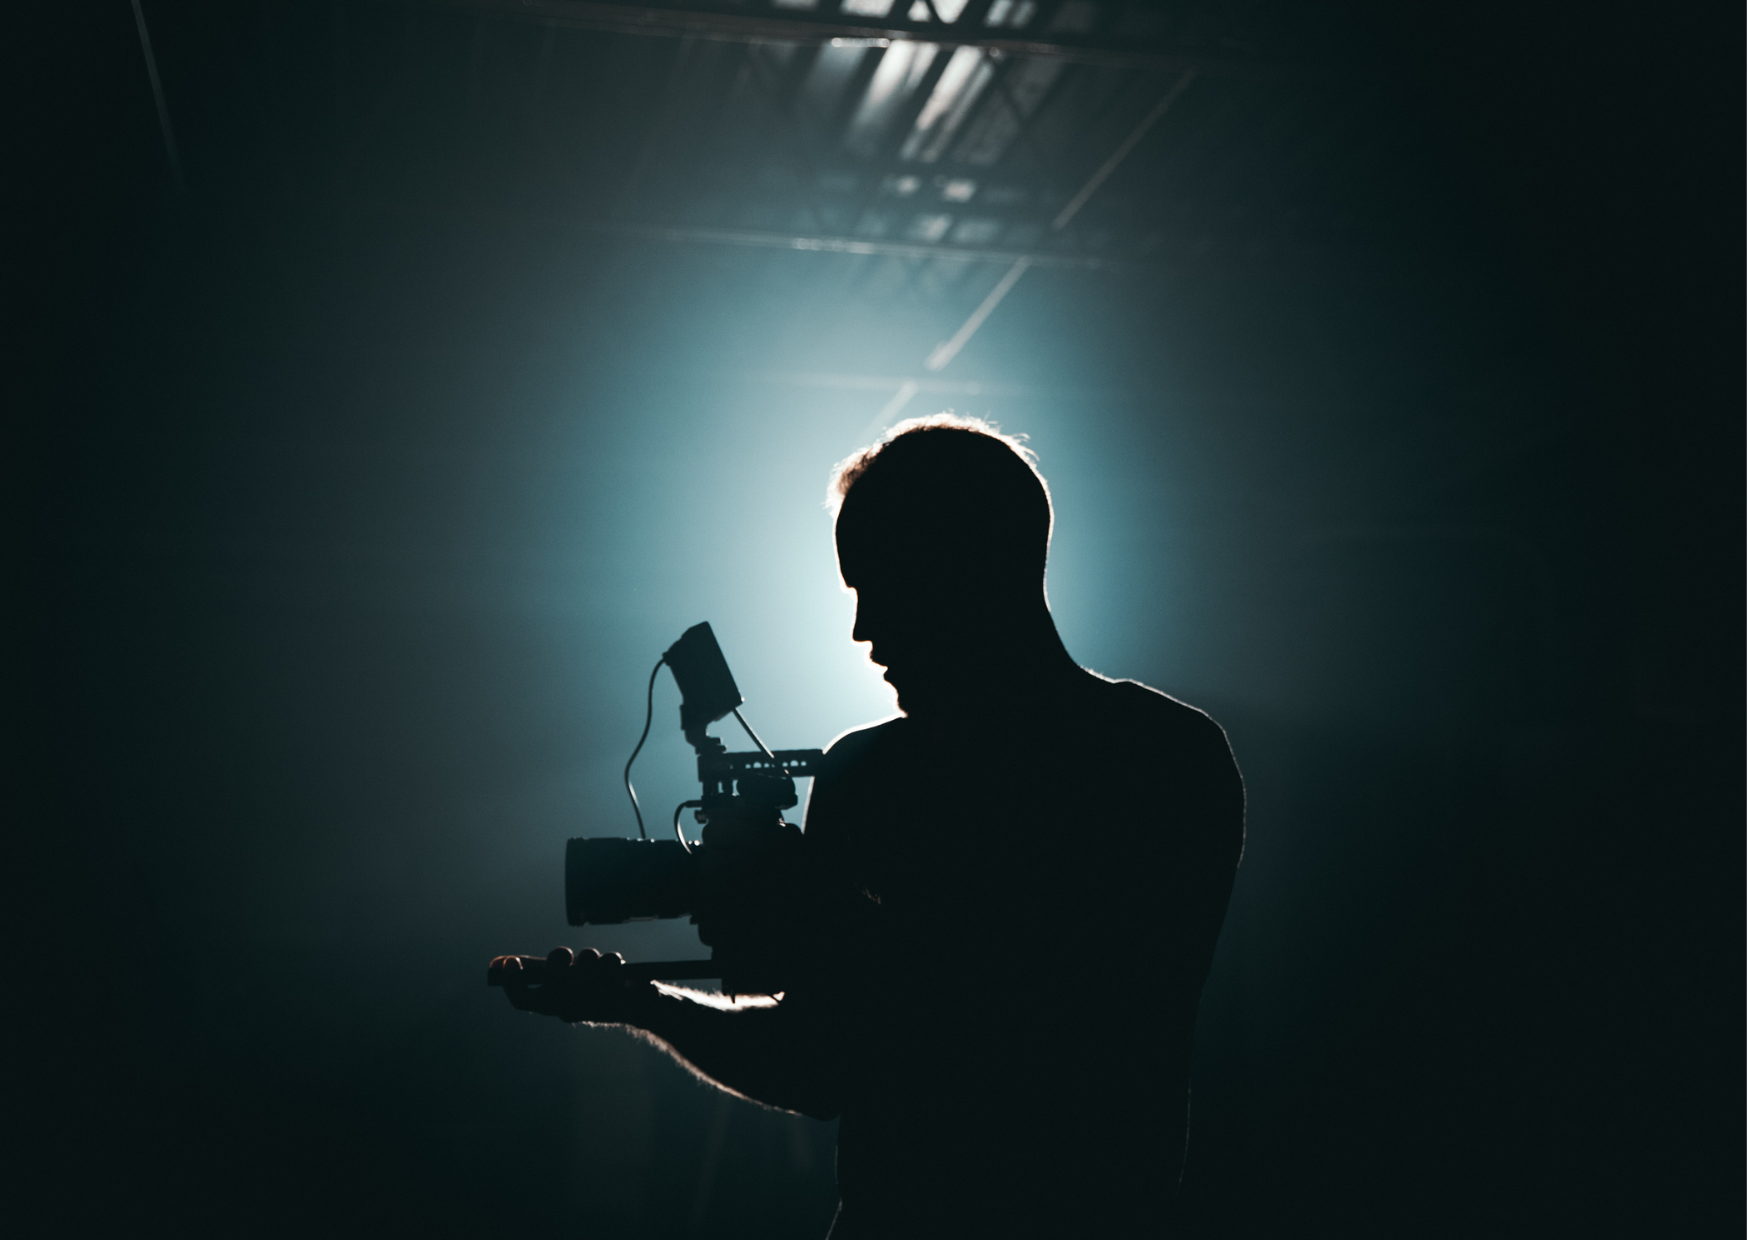 a silhouette of a man holding a camera